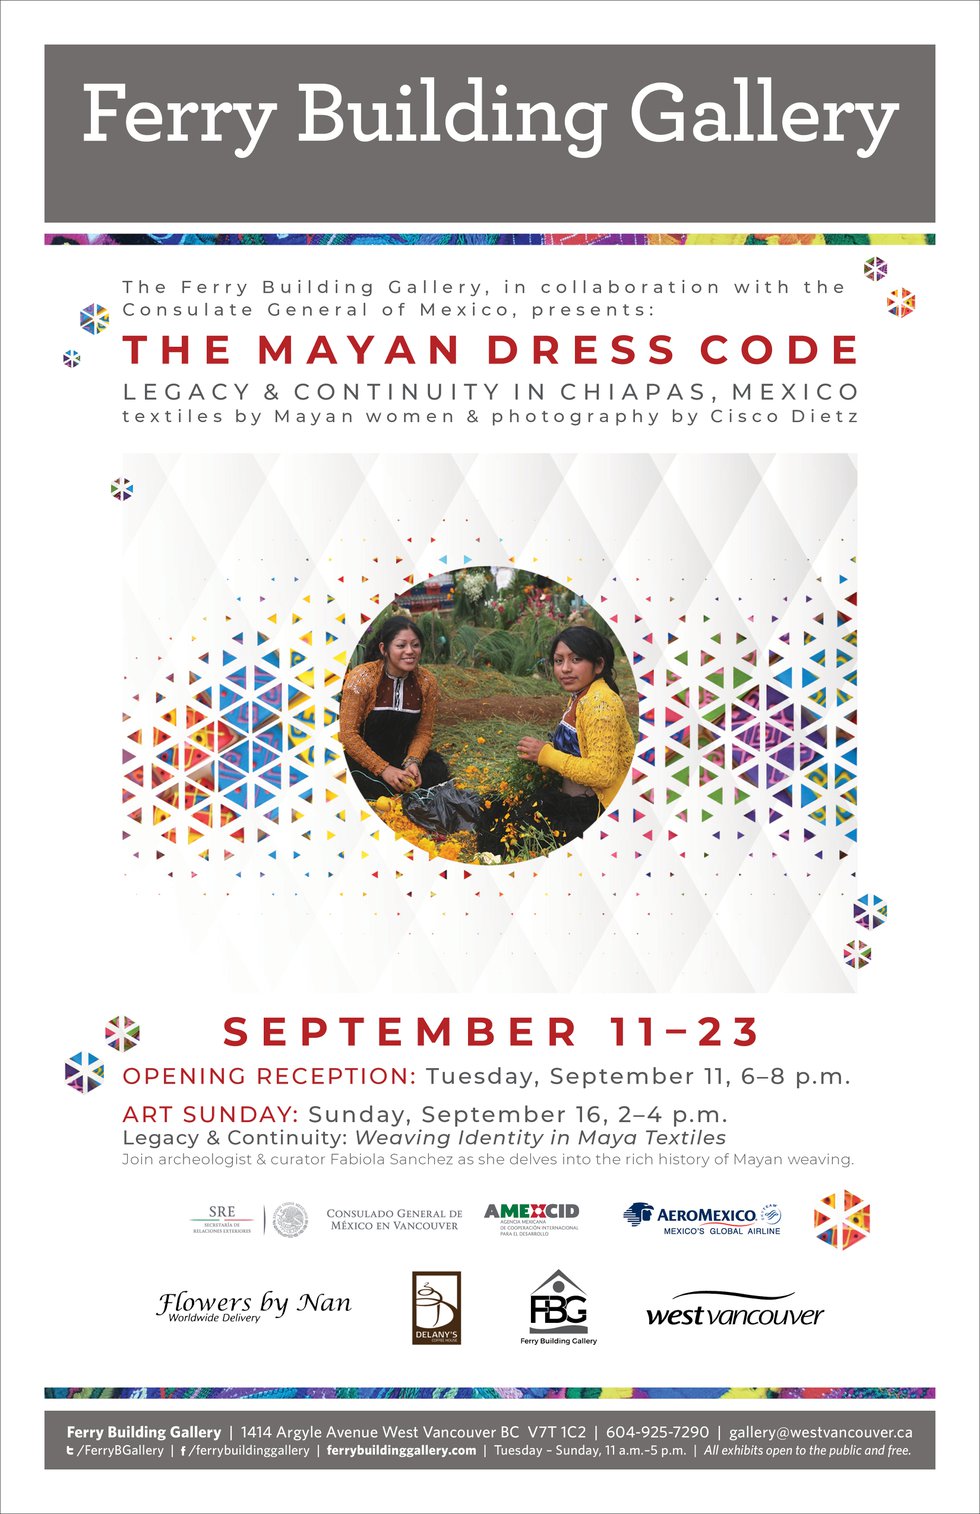 The Mayan Dress Code: Legacy and Continuity in Chiapas, Mexico, 2018